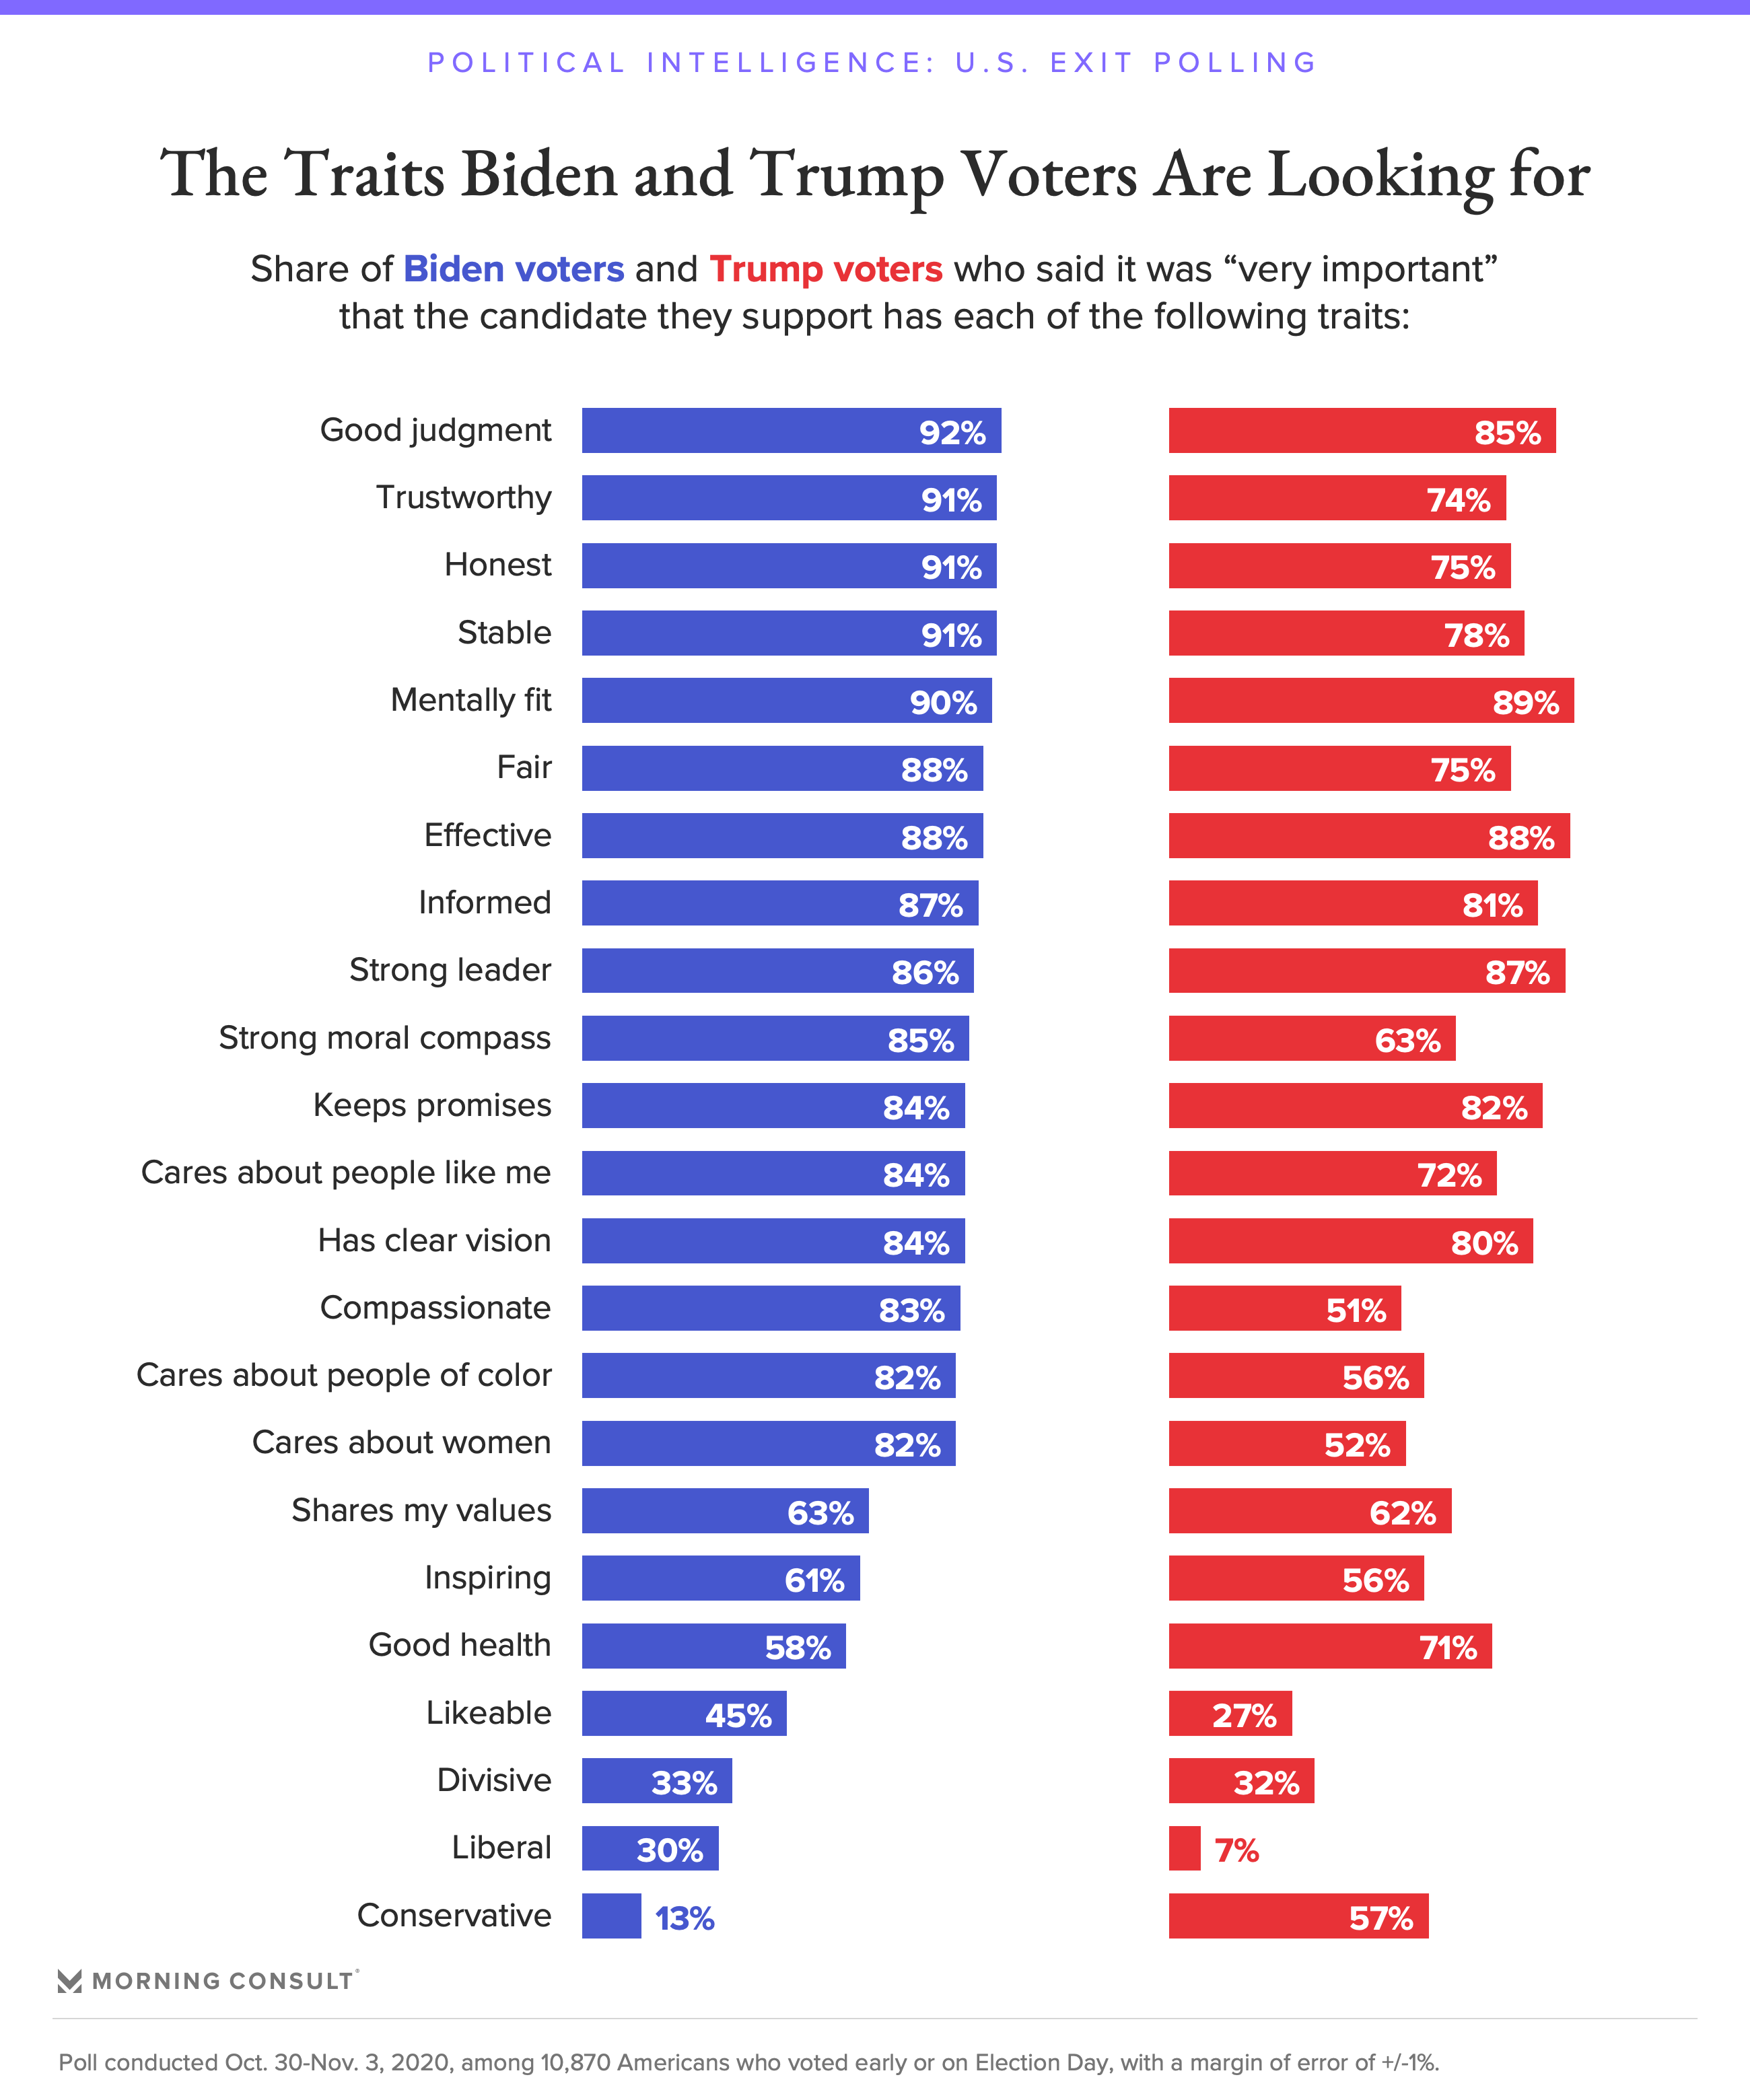 201103_Exit-Polling-Candidate-Traits_FUL